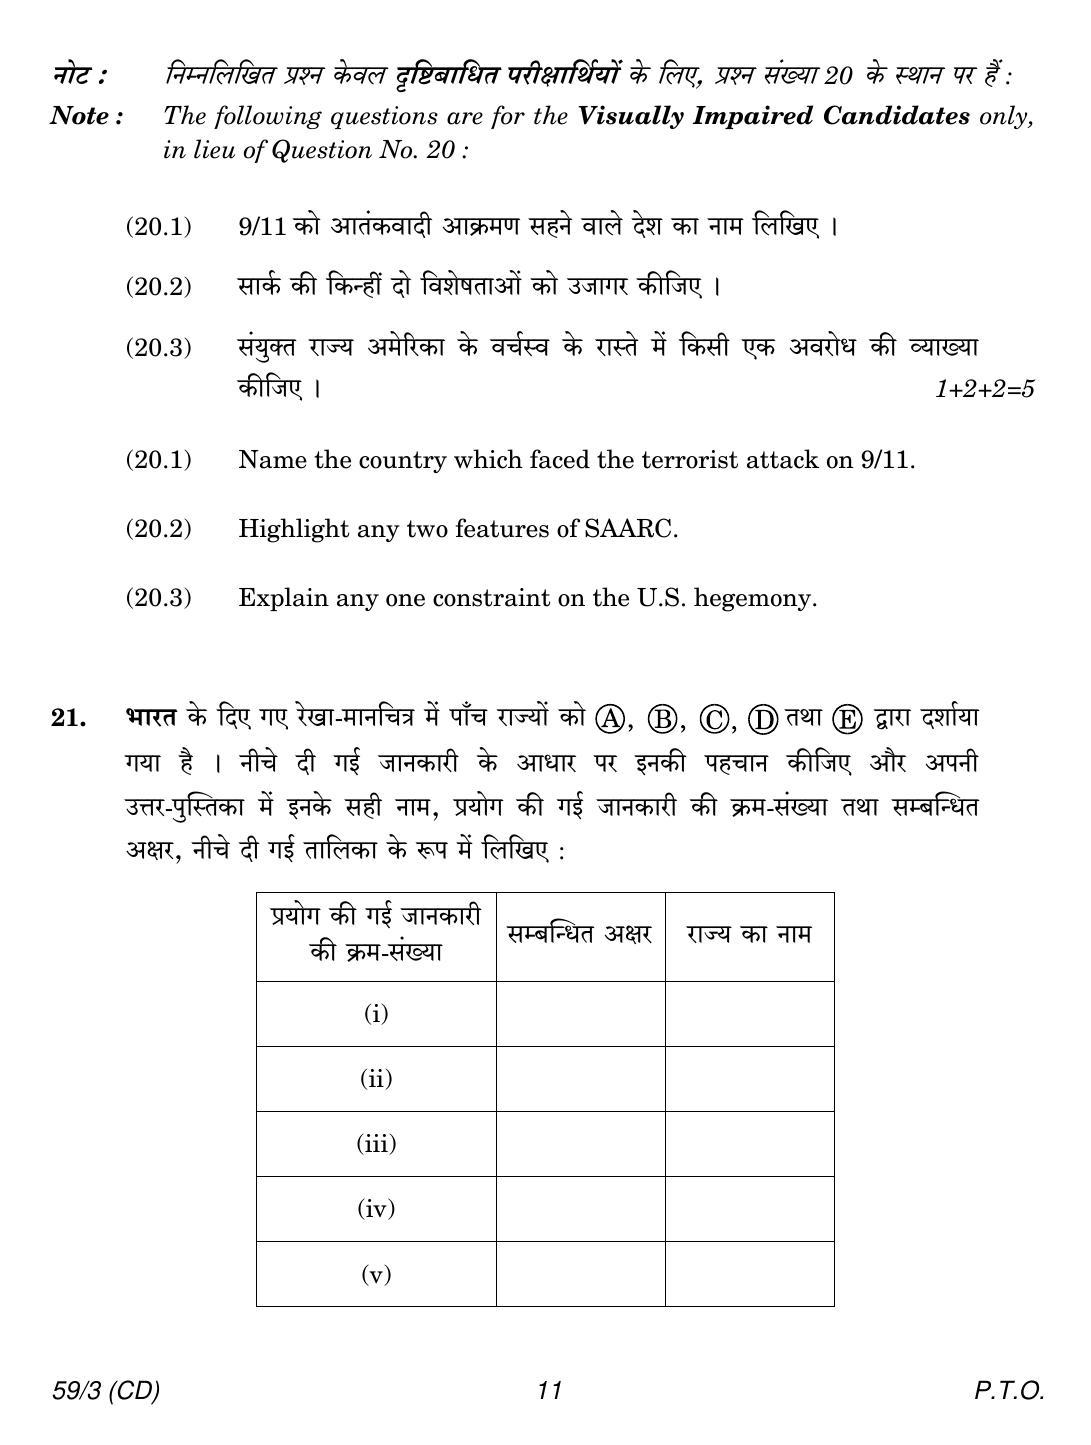 CBSE Class 12 59-3 POLITICAL SCIENCE CD 2018 Question Paper - Page 11